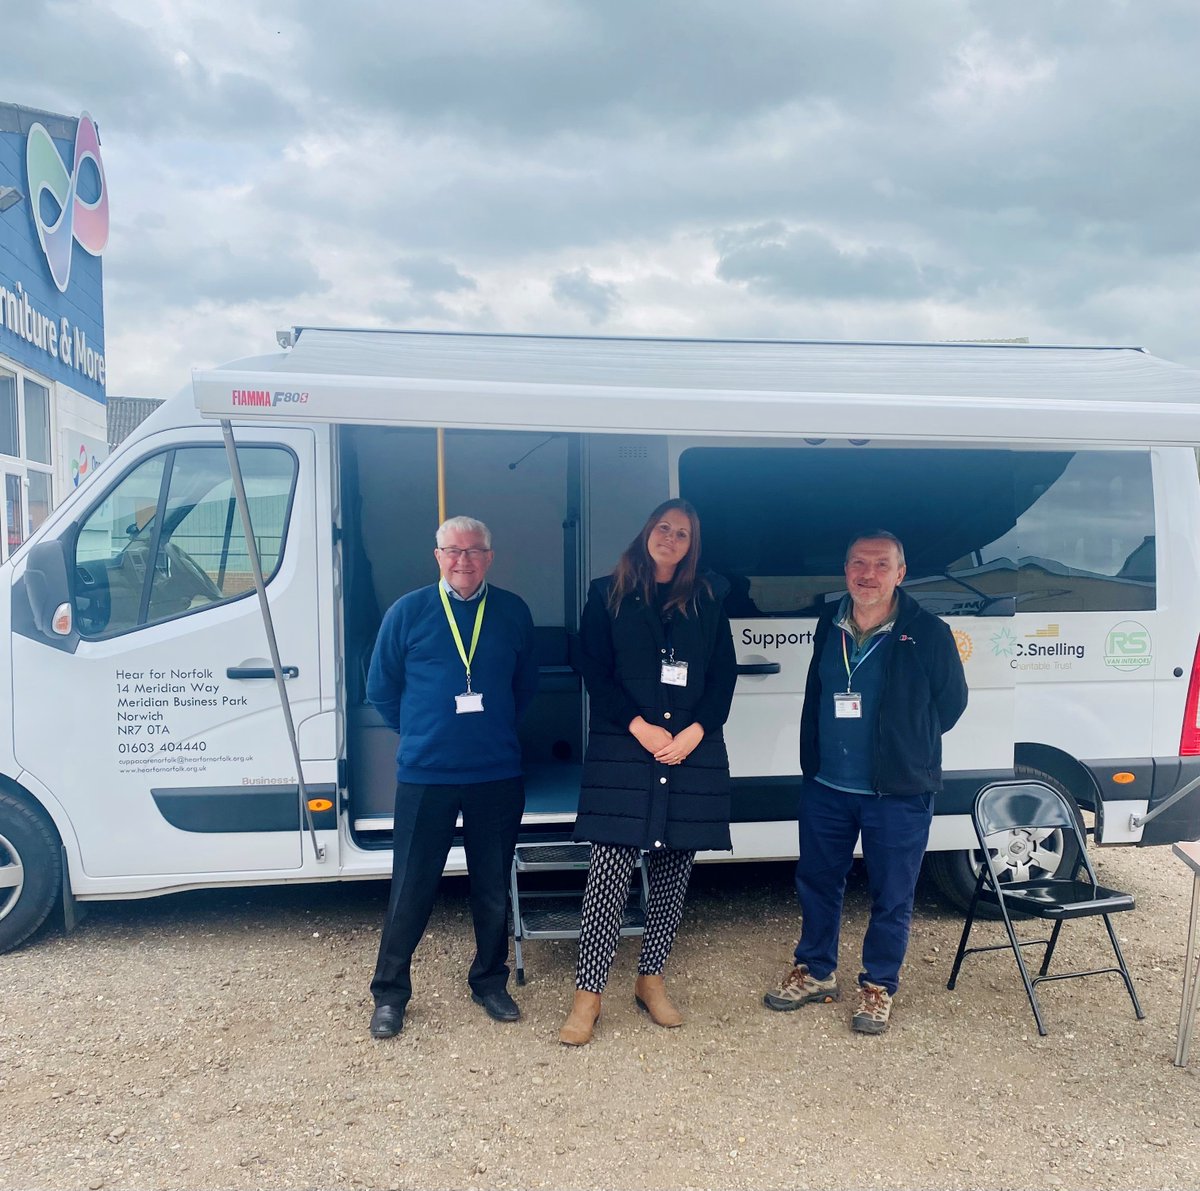 We were very pleased to host the #CuppaCare bus at our Dereham Charity shop today - our volunteer co-ordinator, Laura, even popped along to help out 🙂
To find out when and where the bus will be & to join the team for a cuppa, visit: hearfornorfolk.org.uk/cuppa-care/